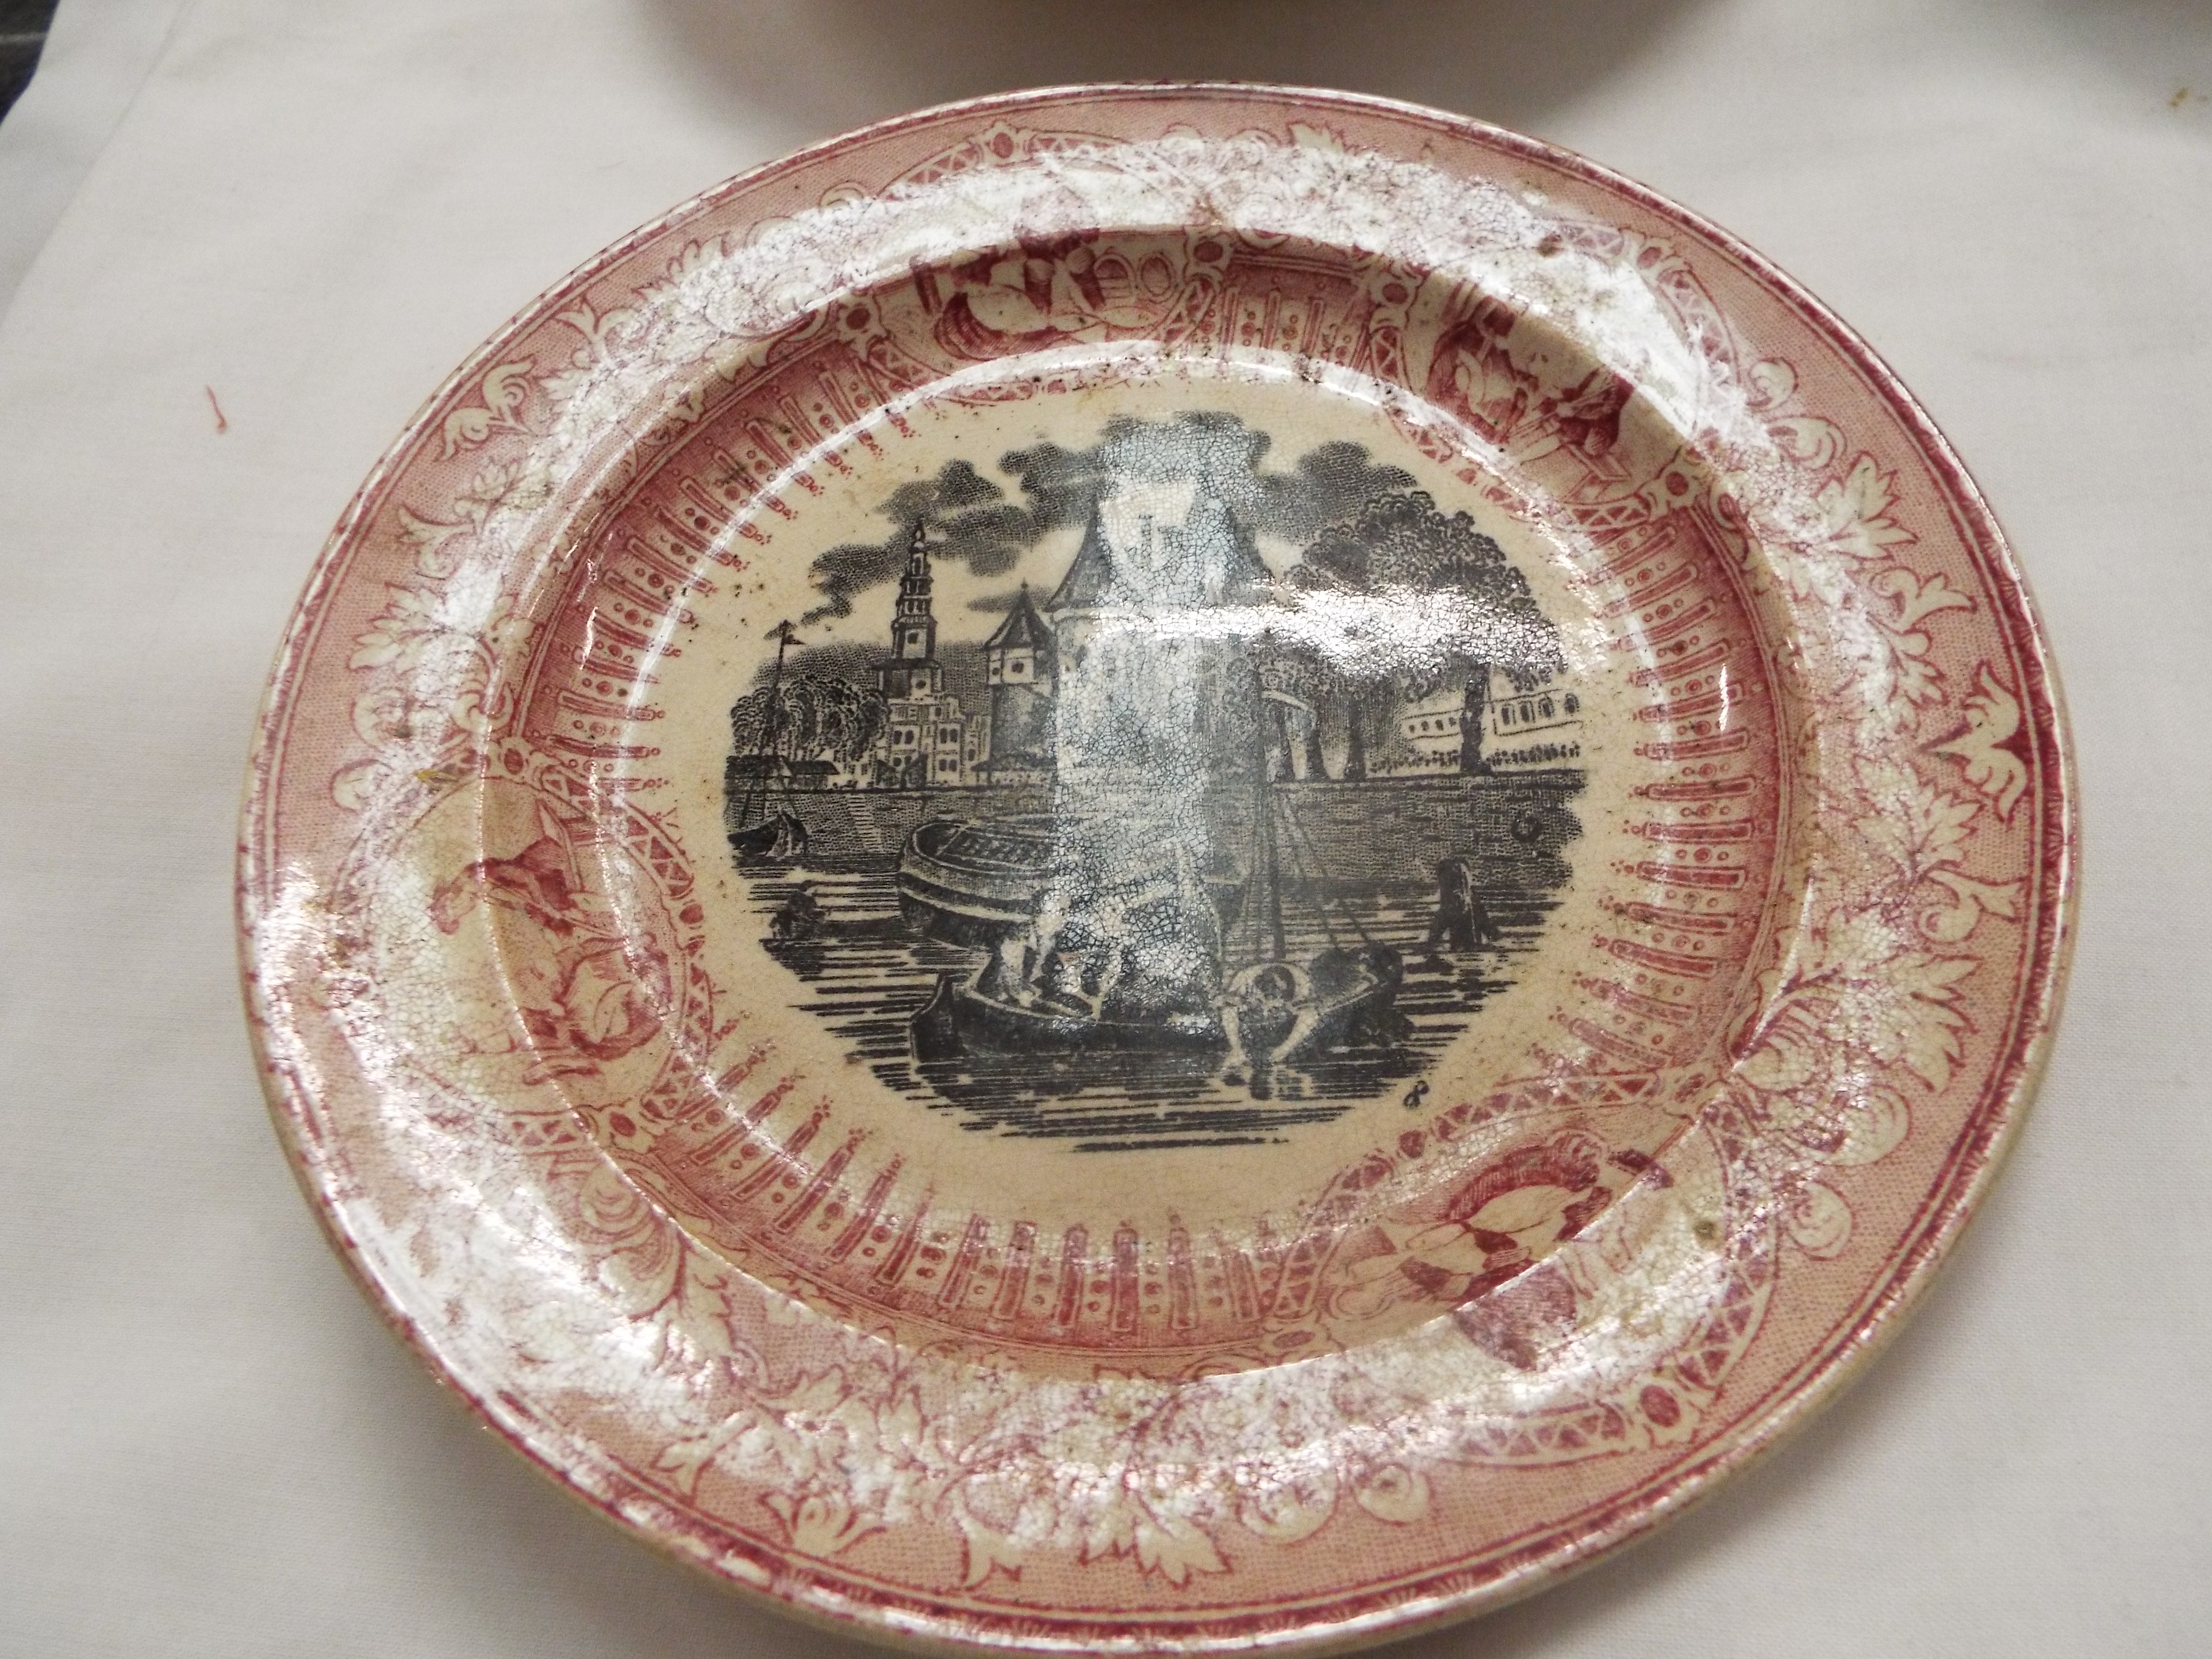 An antique 'God Speed the Plough' farmer's loving cup, lusterware dish, posy vase (possibly Minton), - Image 11 of 13